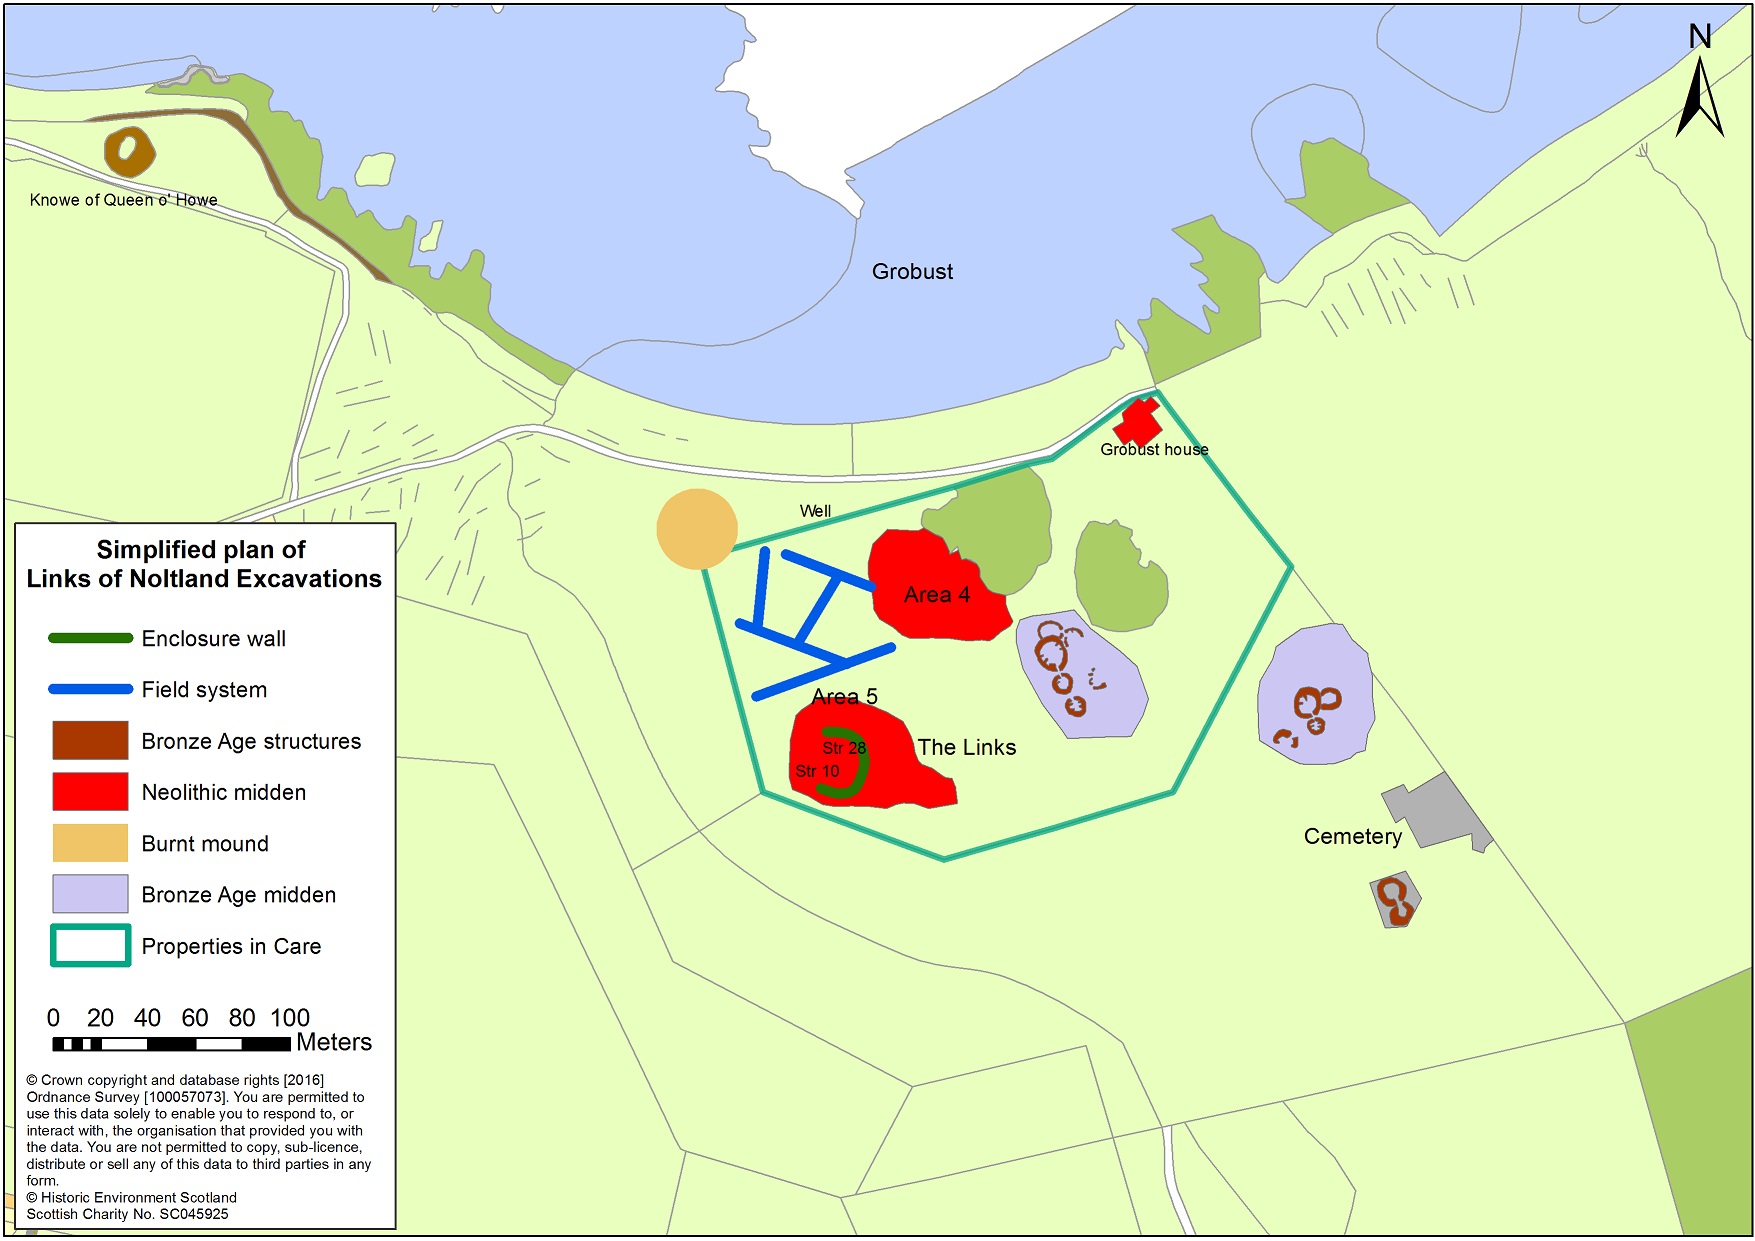 Map of the Links of Noltland excavation site